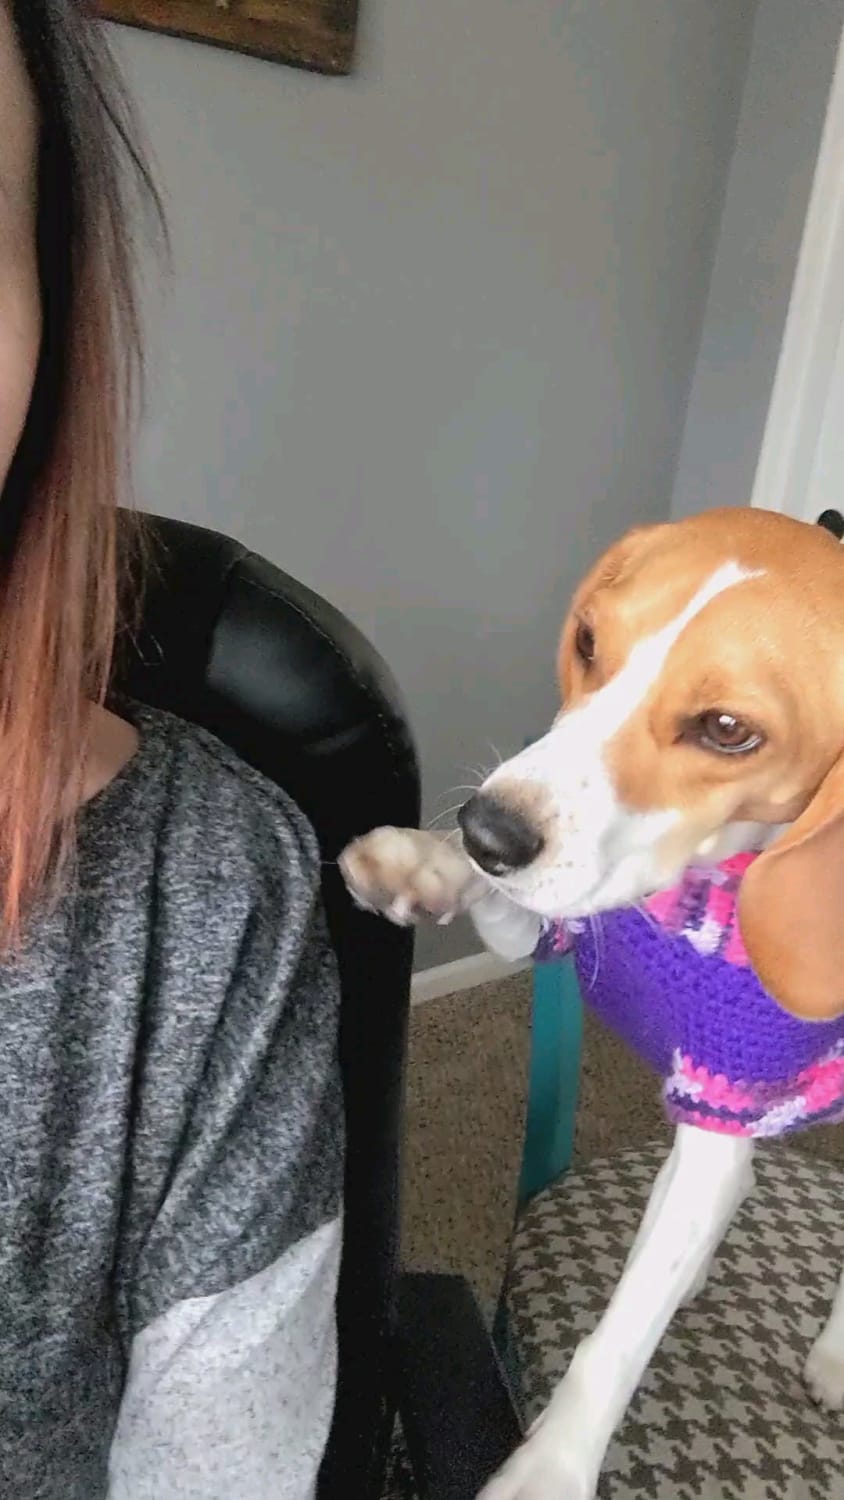 Trying to work from home with my beagle.